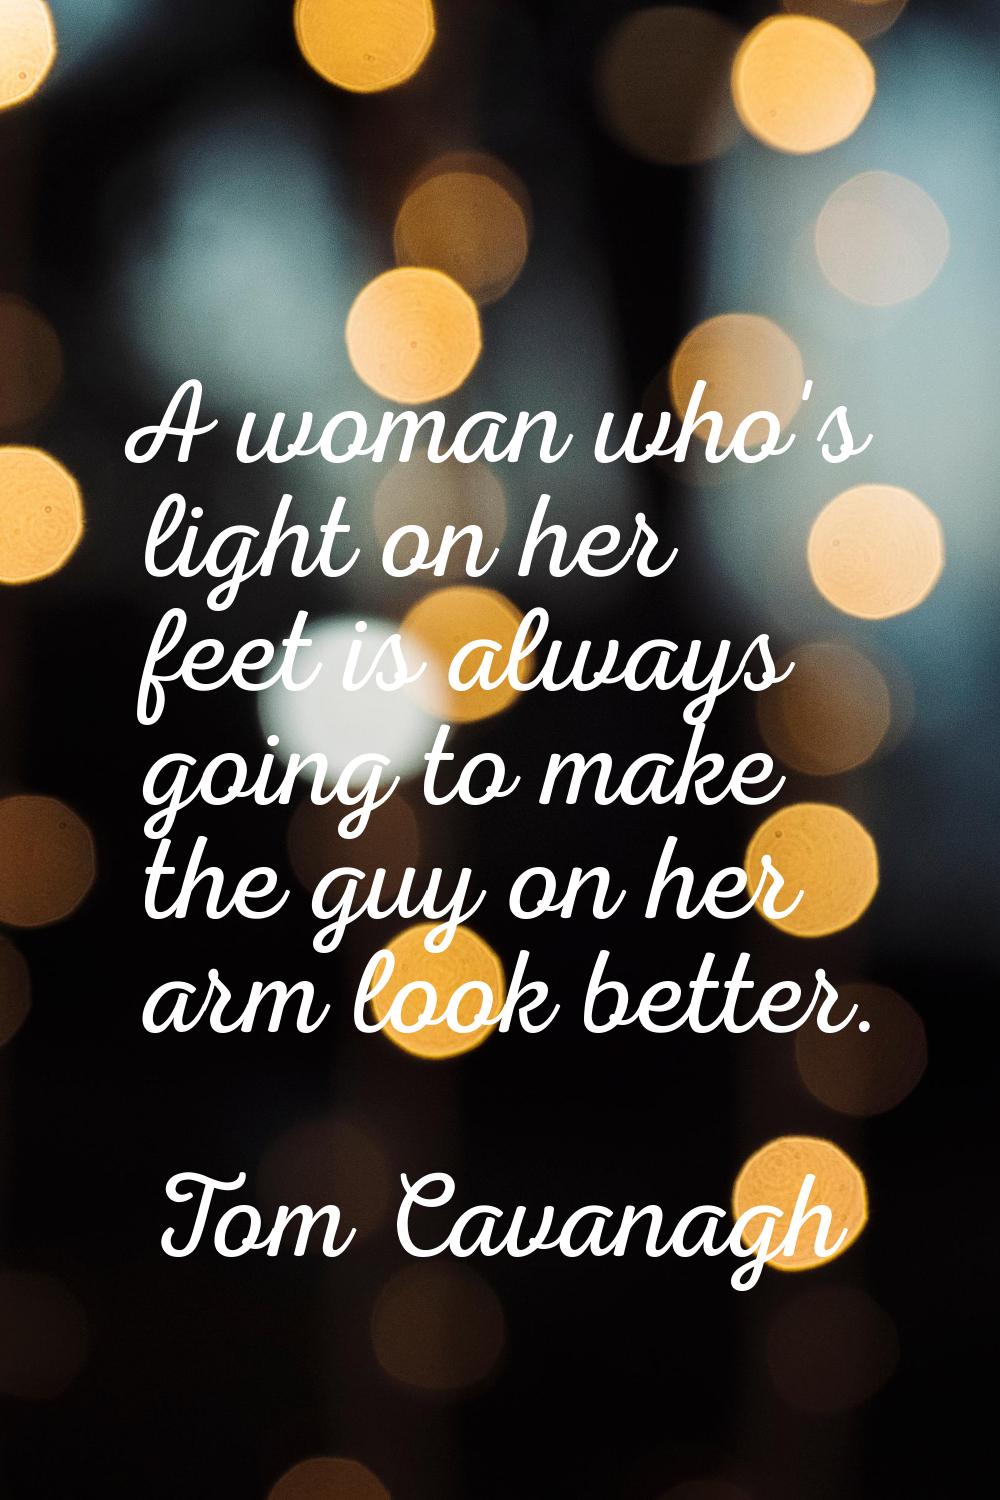 A woman who's light on her feet is always going to make the guy on her arm look better.